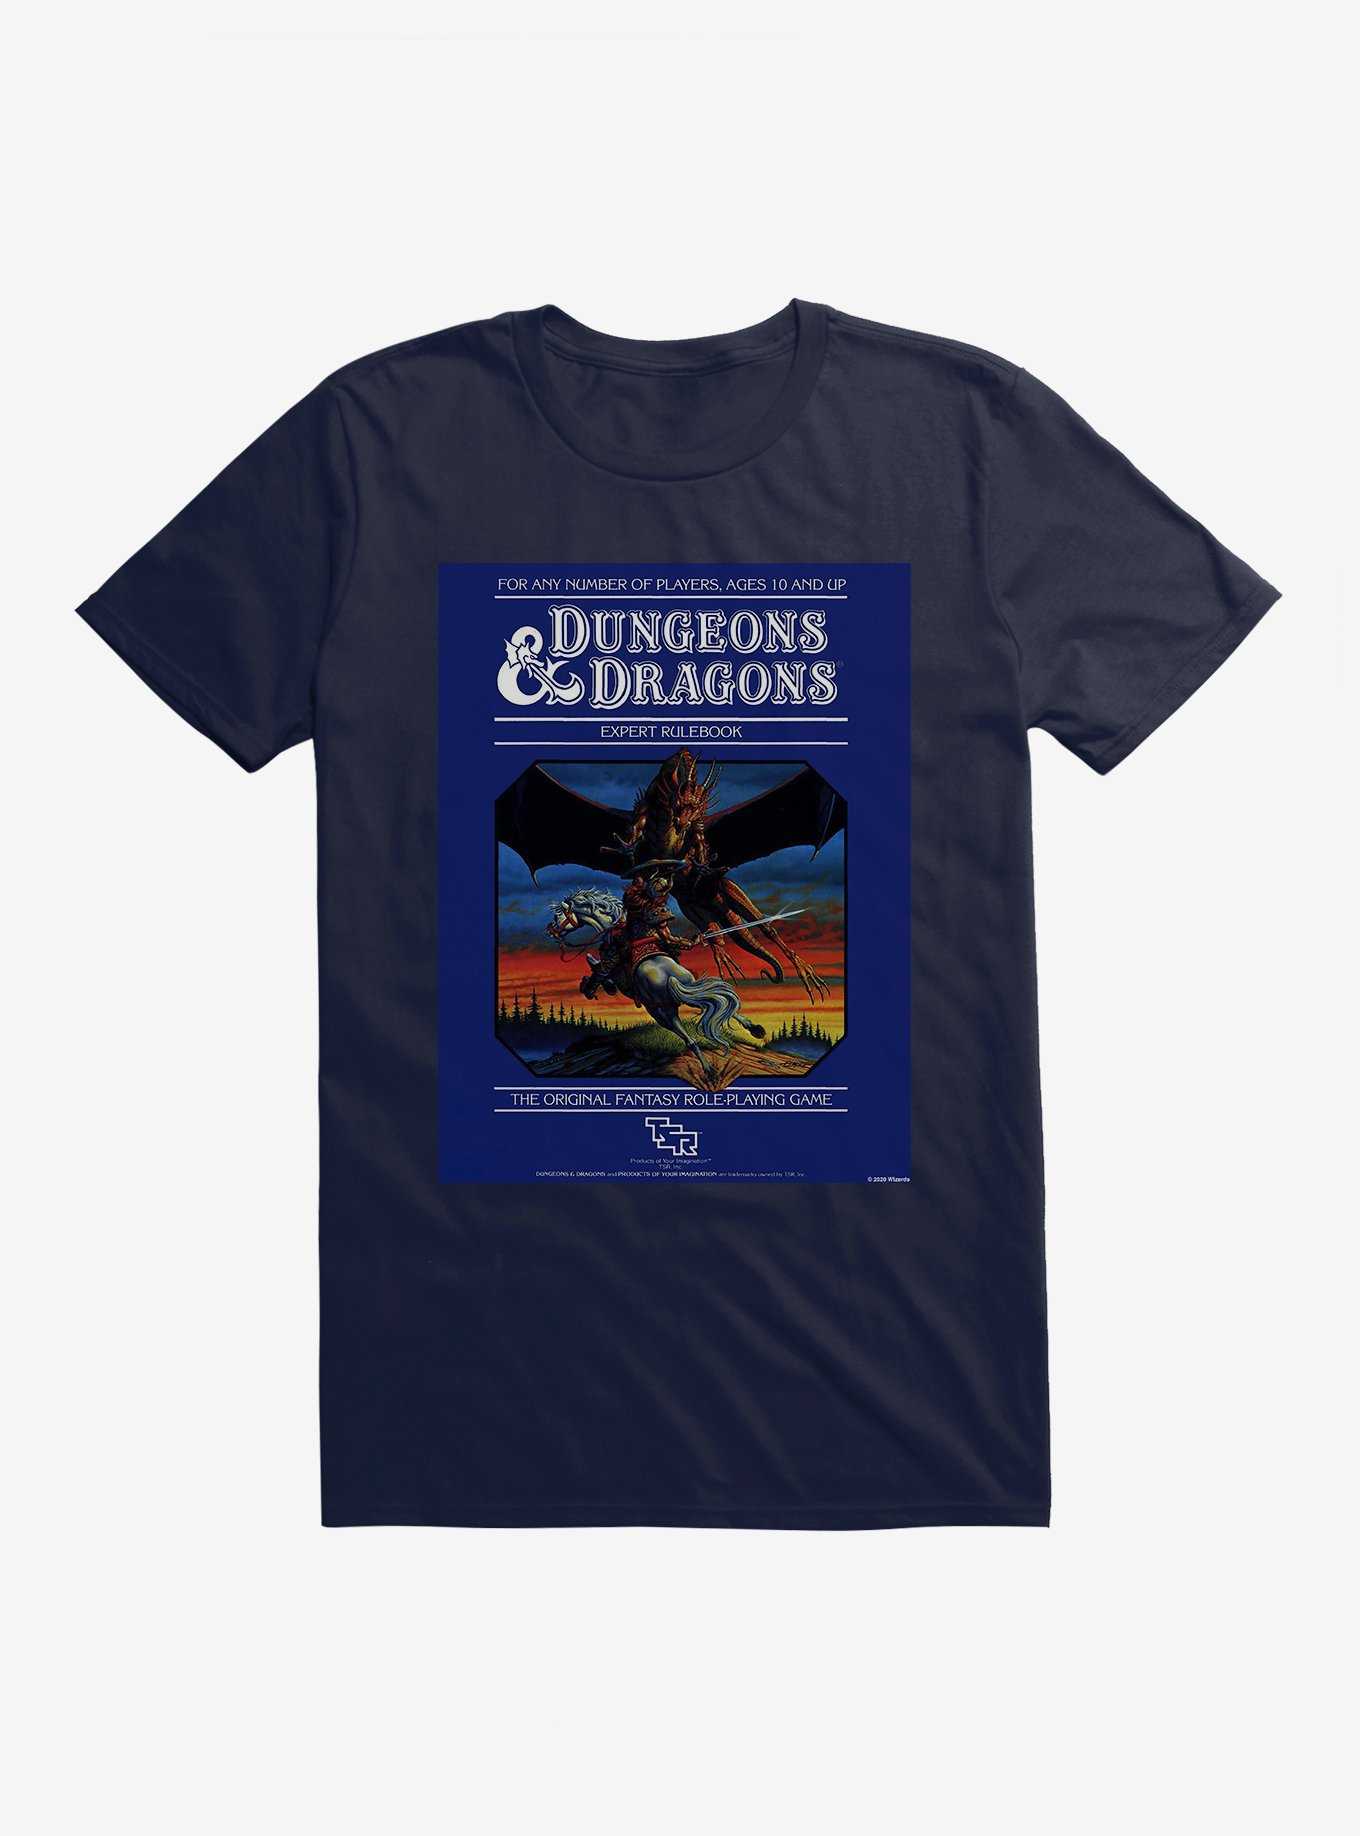 Dungeons & Dragons Expert Rulebook Set Two T-Shirt, , hi-res